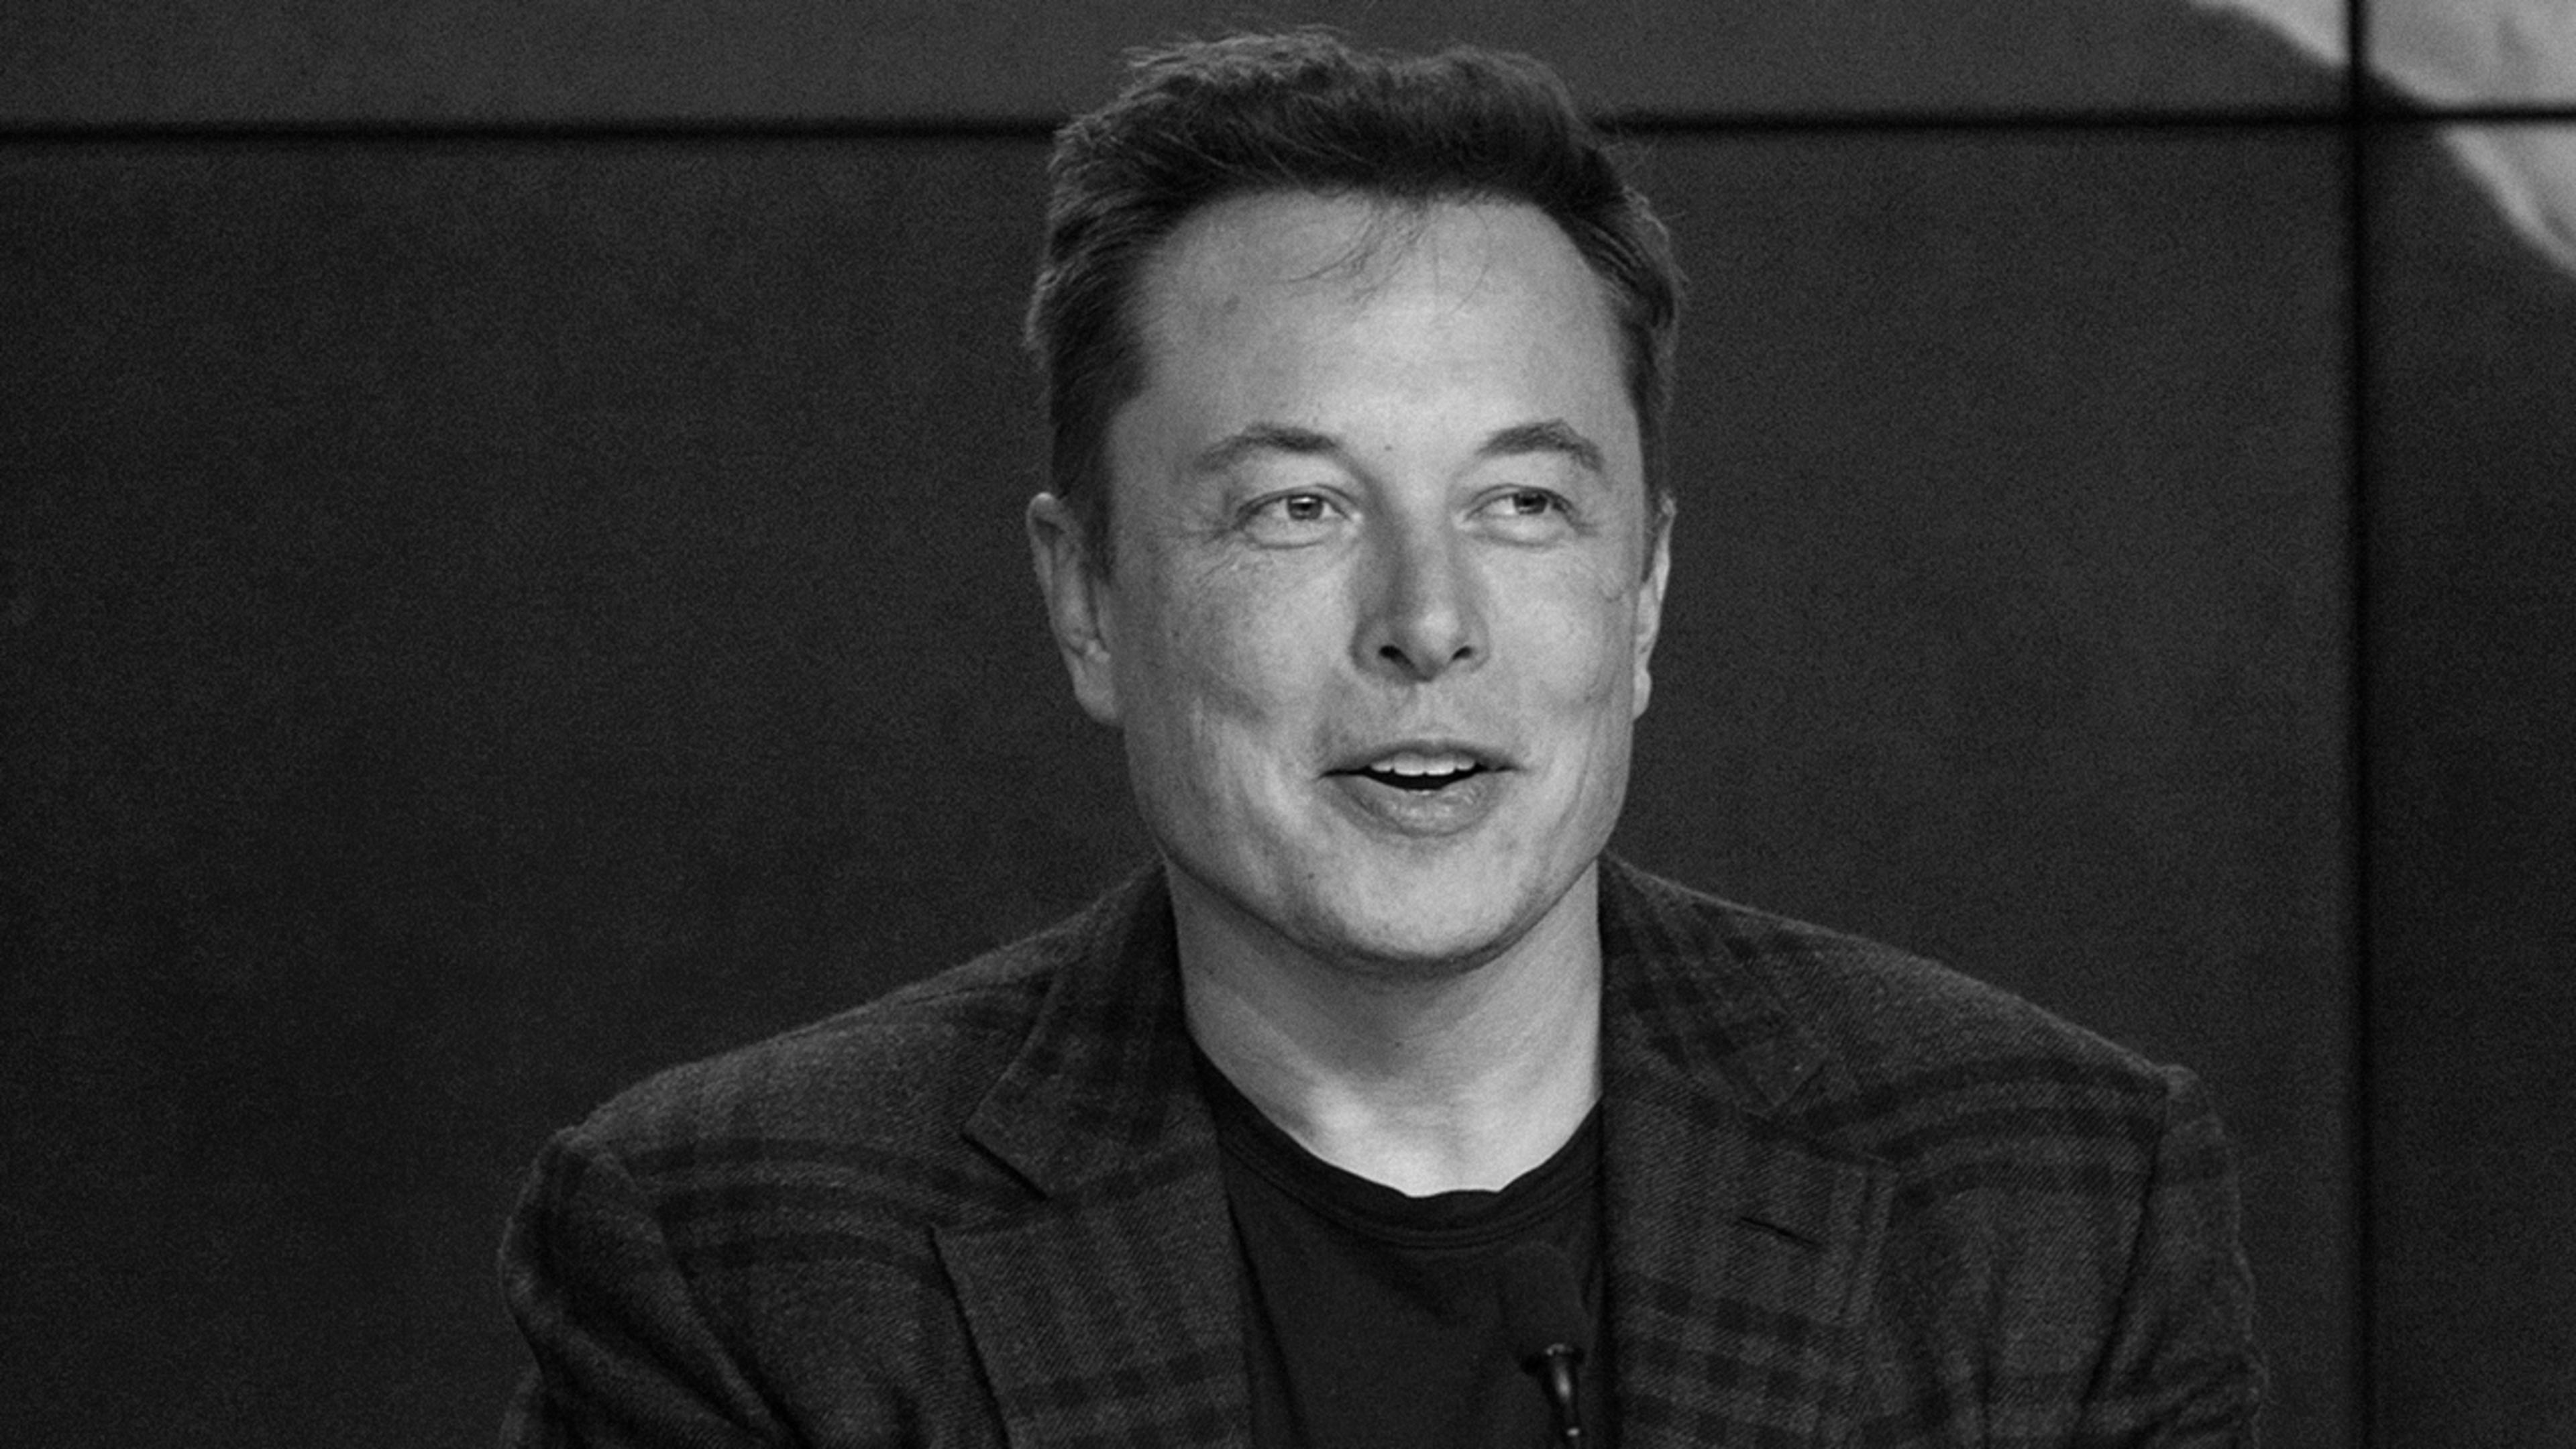 Elon Musk says past year “the most difficult and painful year of my career”